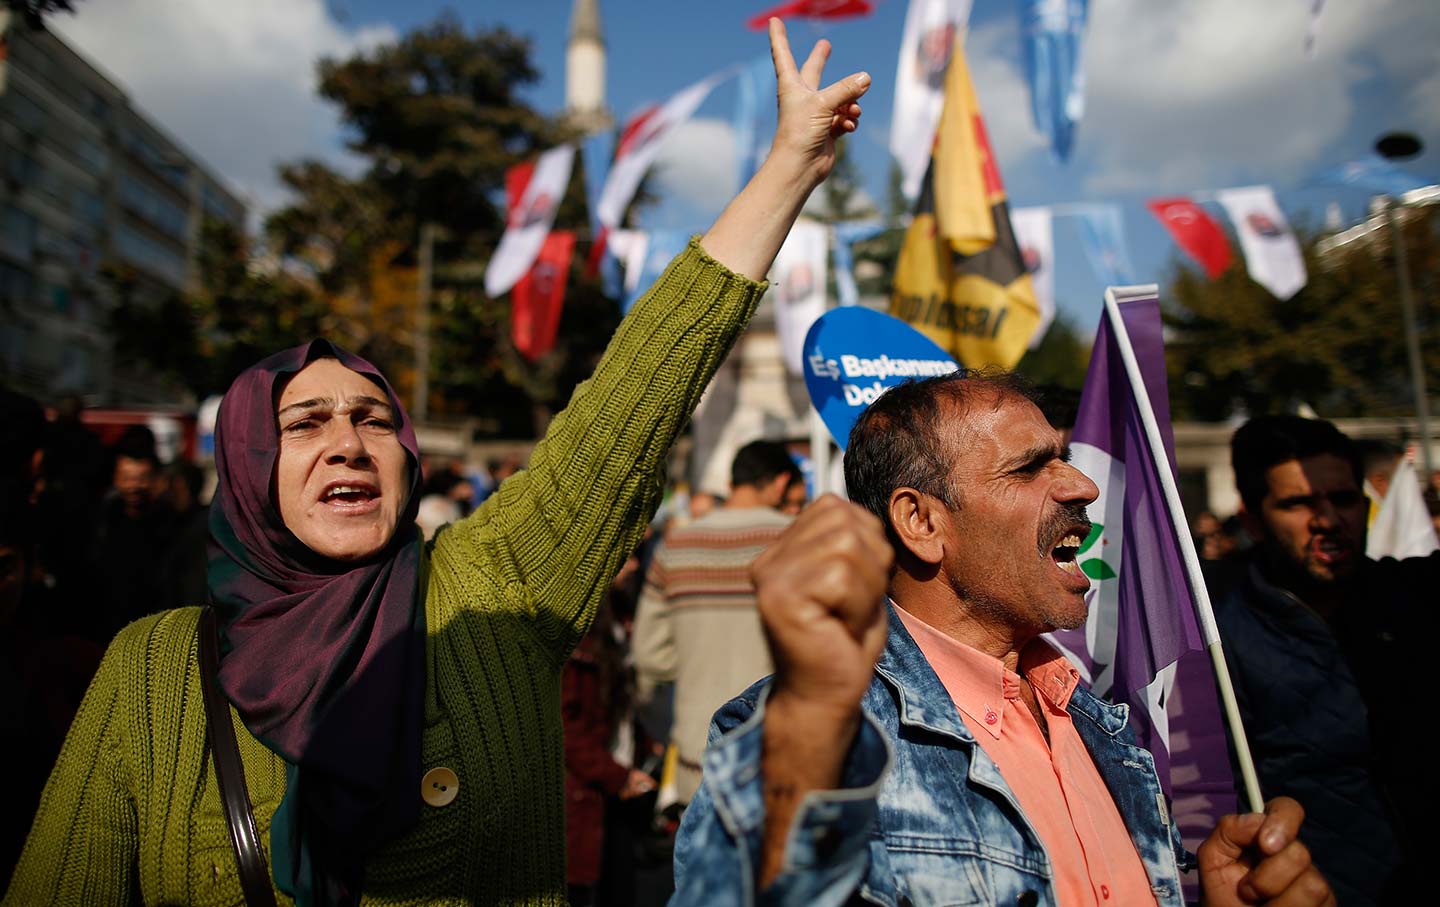 A perspective on the Turkish election from Rojava